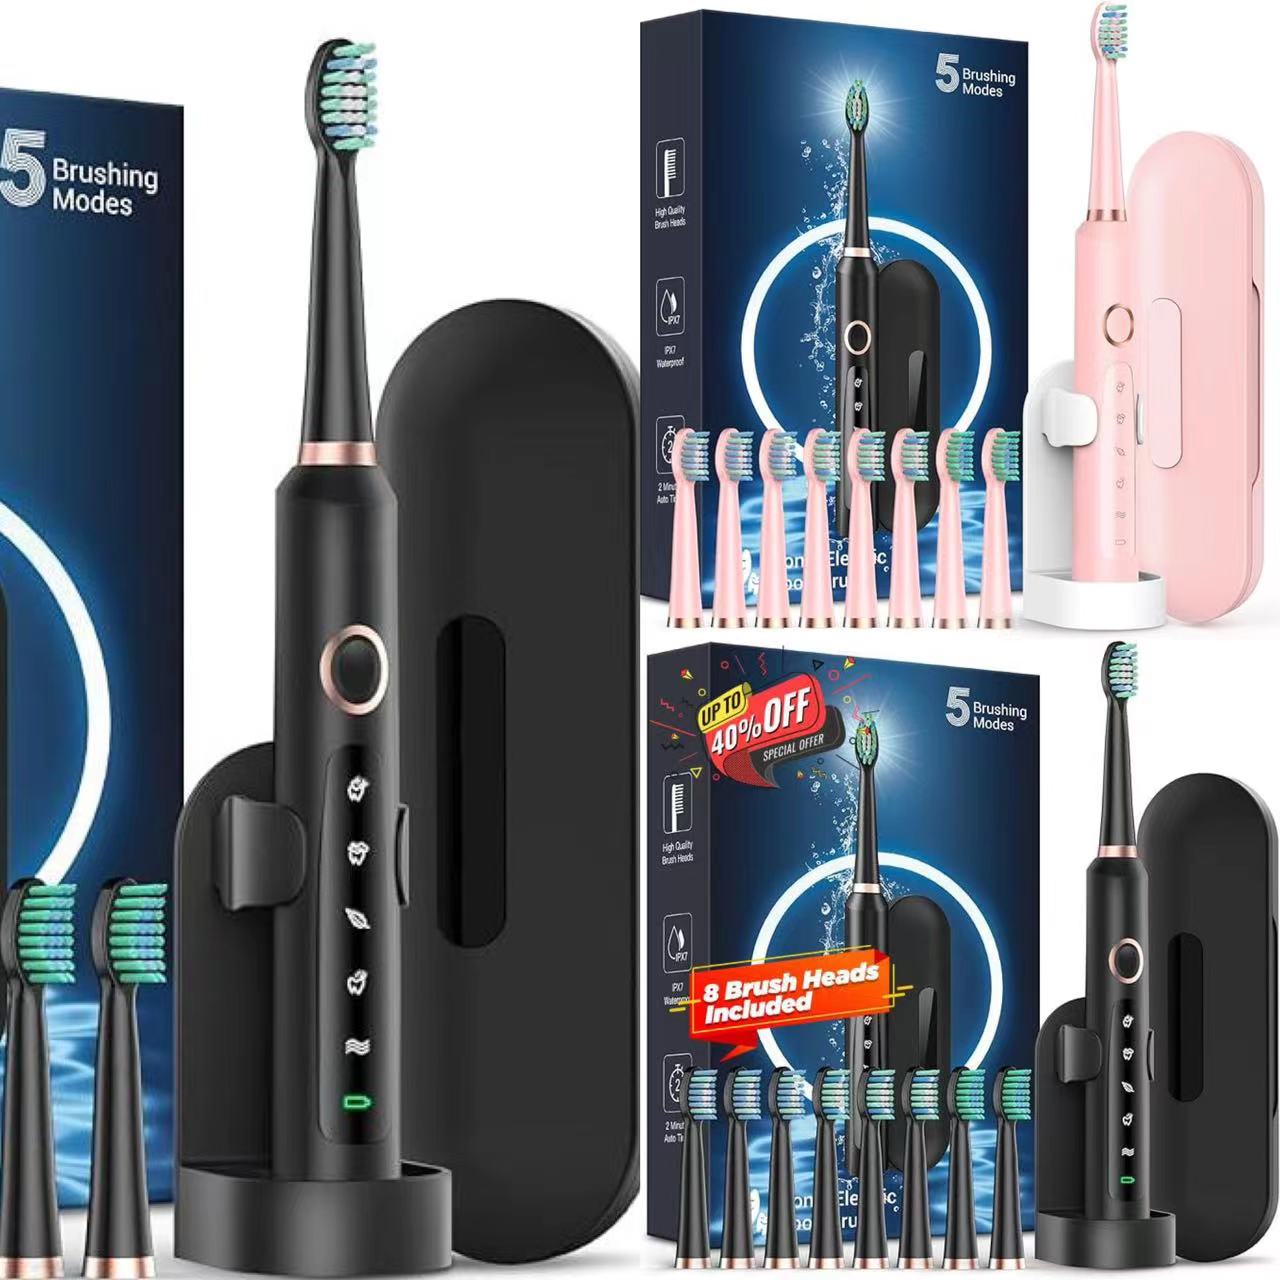 RTAUYS Sonic Electric Toothbrush for Adults - Rechargeable Electric Toothbrushes with 8 Brush Heads & Holder, Travel Case, Power Electric Toothbrush with Holder，3 Hours Charge for 120 Days